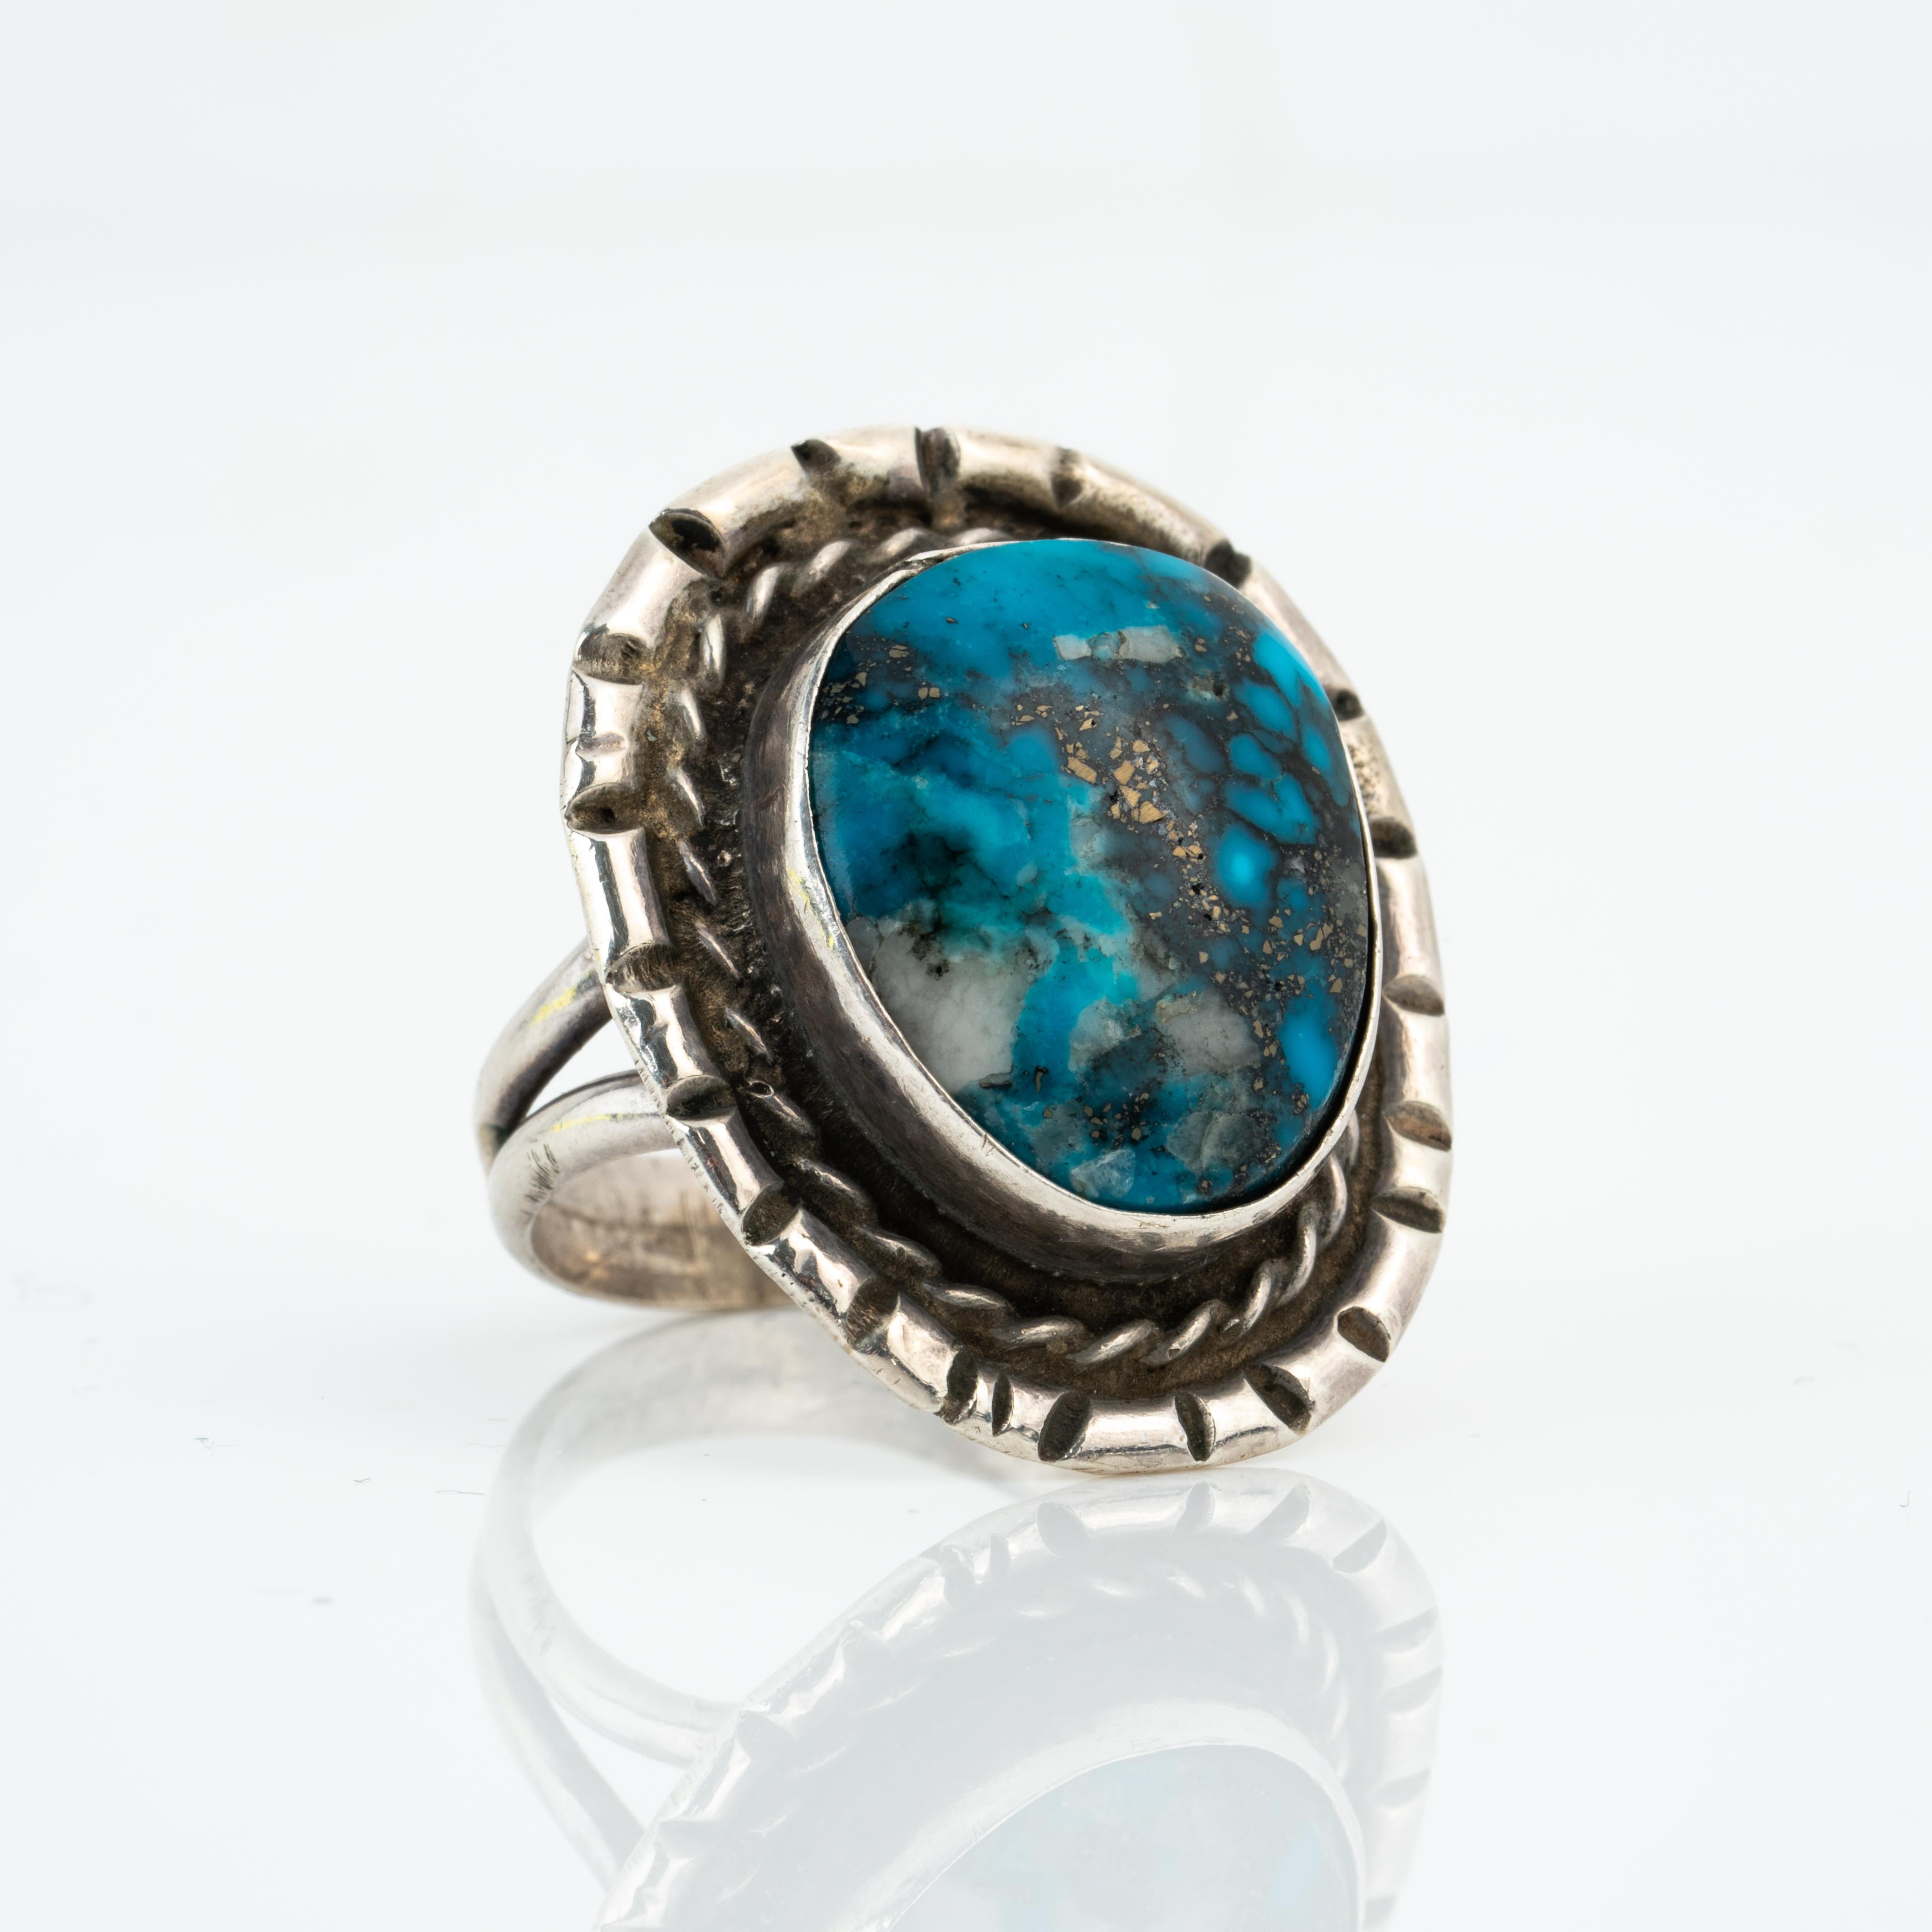 Vintage Navajo Silver and Apache Blue Turquoise Ring
A wonderful handmade Navajo Native American ring from the 1970s - hand engraved rope detail surrounds beautiful Apache Blue Turquoise.
Size 7, 7.25
8.47 grams
Top of Ring dimensions:
length: